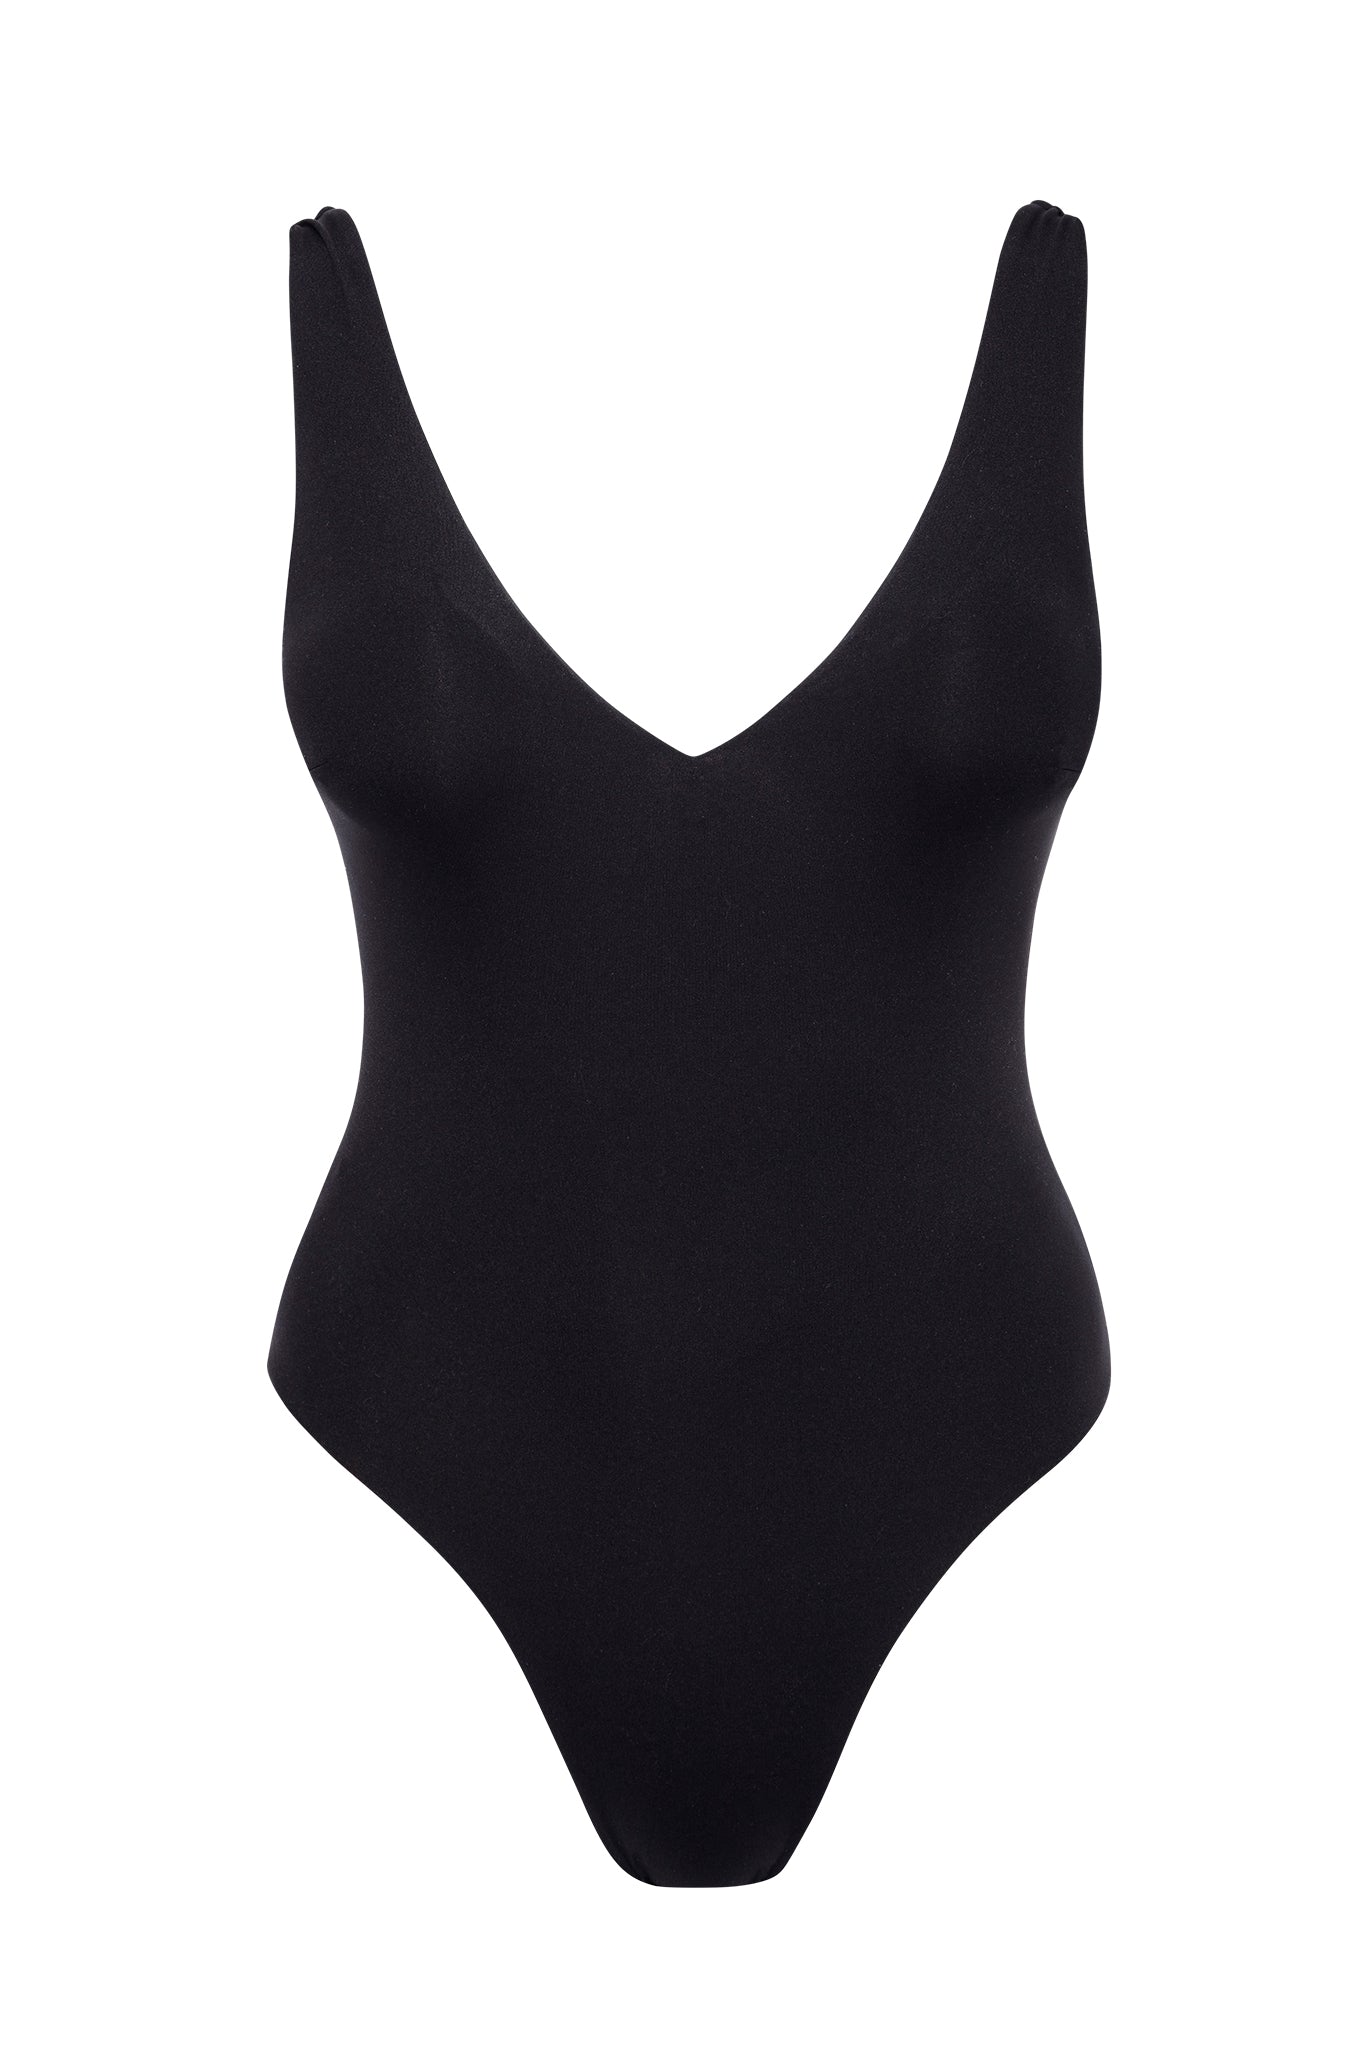 What's Your Go To Swimsuit Style?  One piece swimsuit with shorts, Black  one piece swimsuit, Black swimsuit